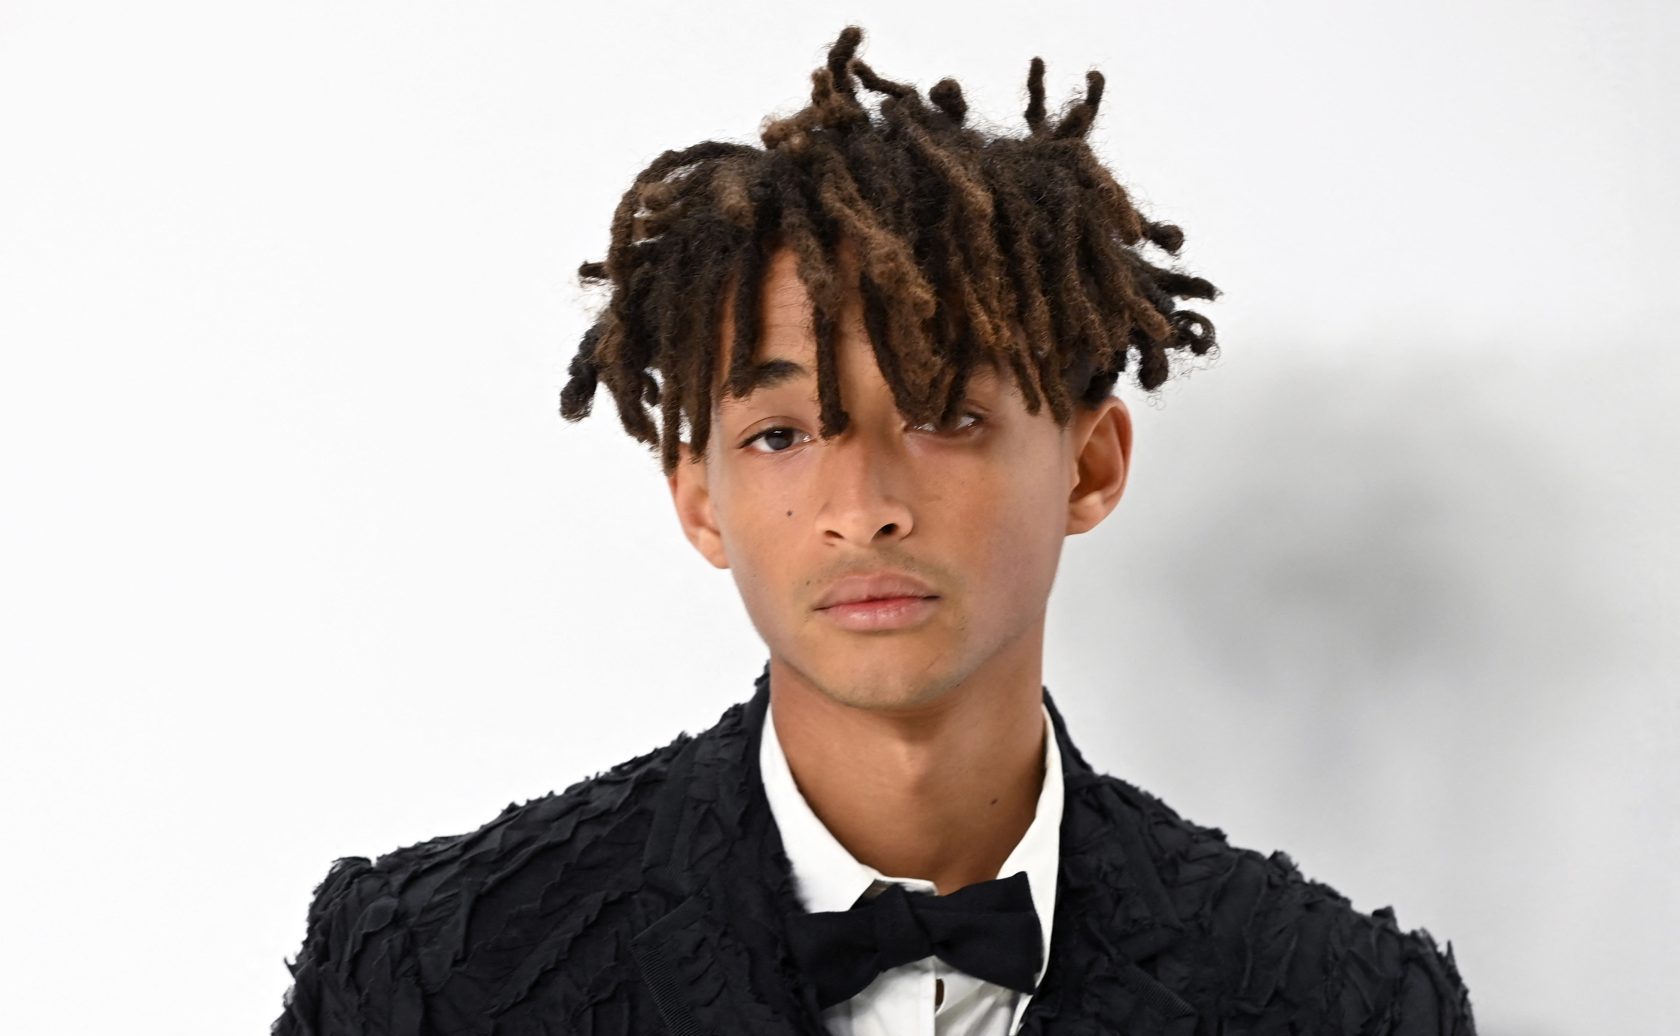 Jaden Smith Crying On Instagram Video, Says Emotions Are ‘Okay’ (Watch)